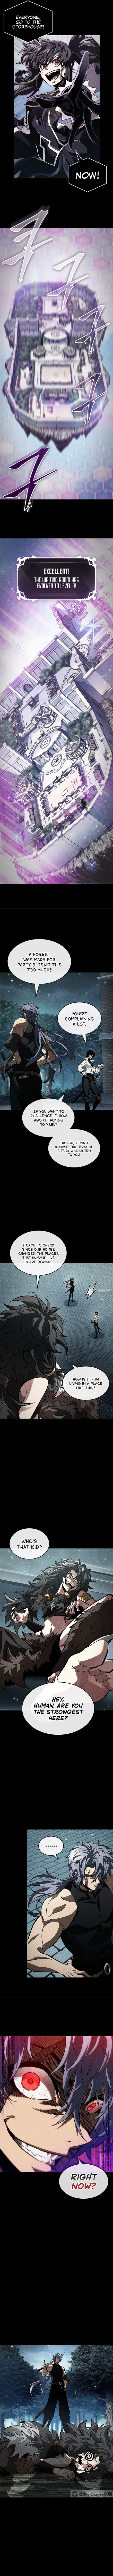 Pick Me Up - Chapter 94 Page 8